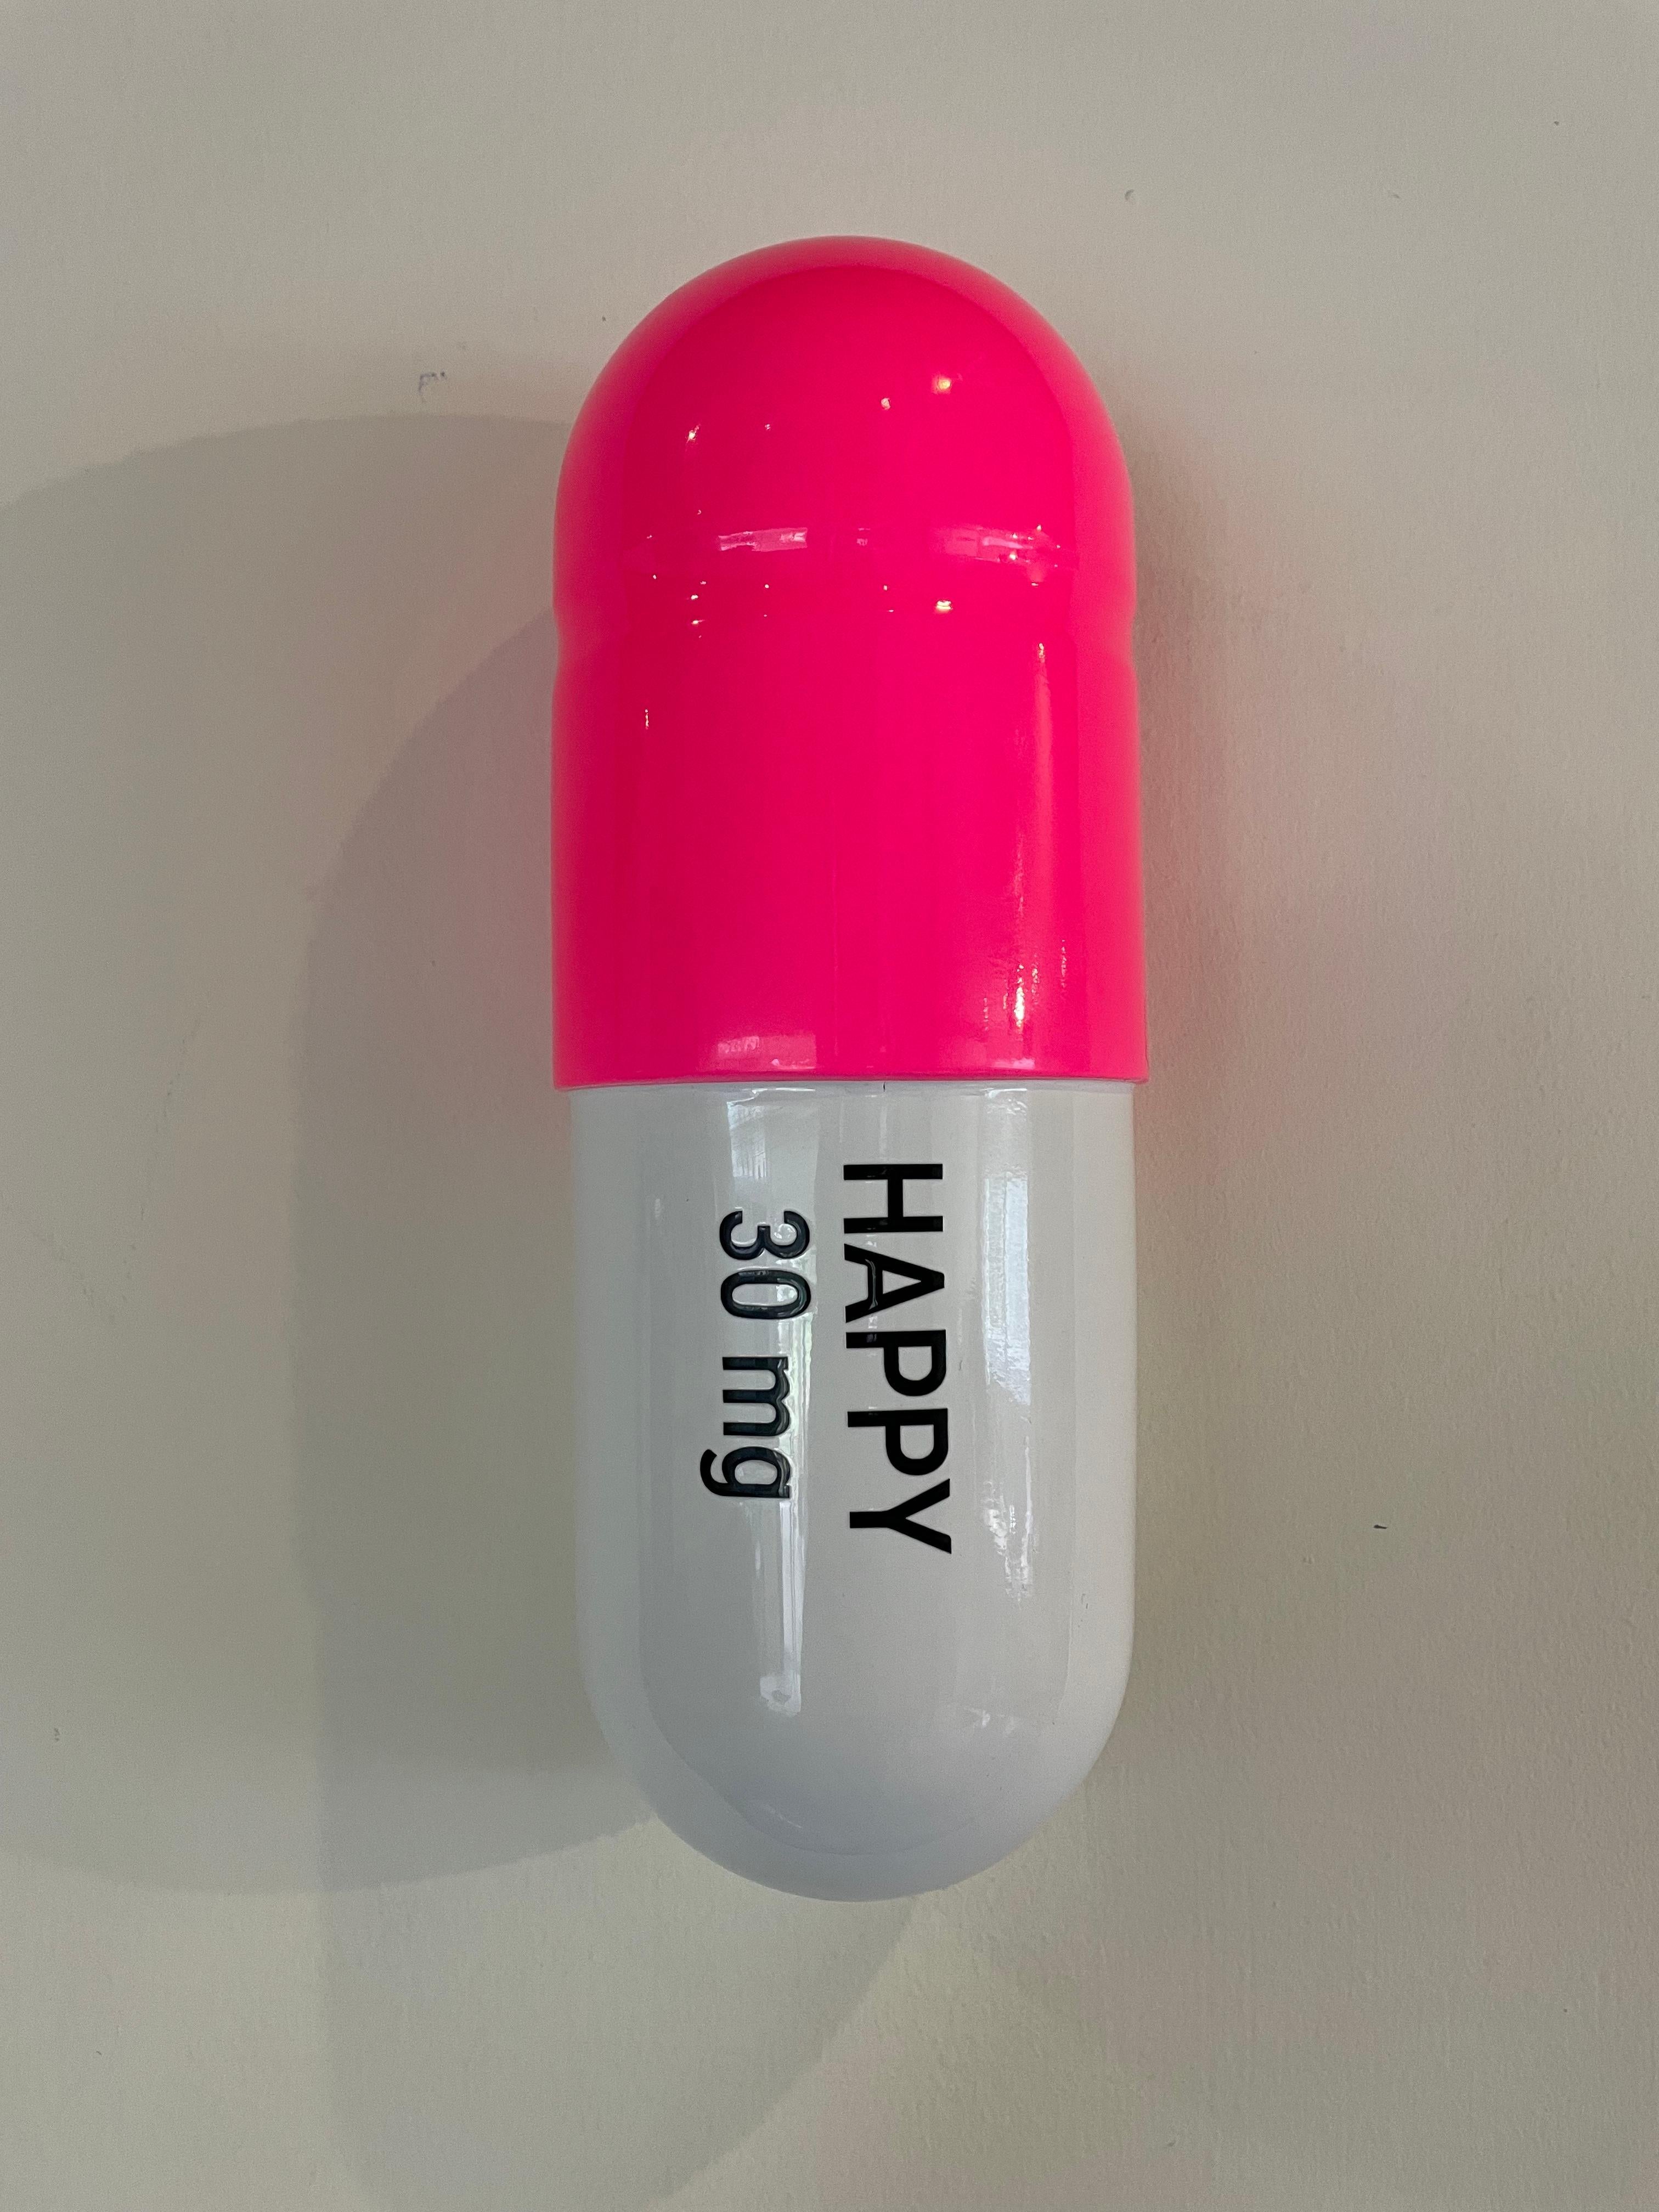 Tal Nehoray Still-Life Sculpture - 30 mg Large Happy pill (Pink and white) - figurative sculpture